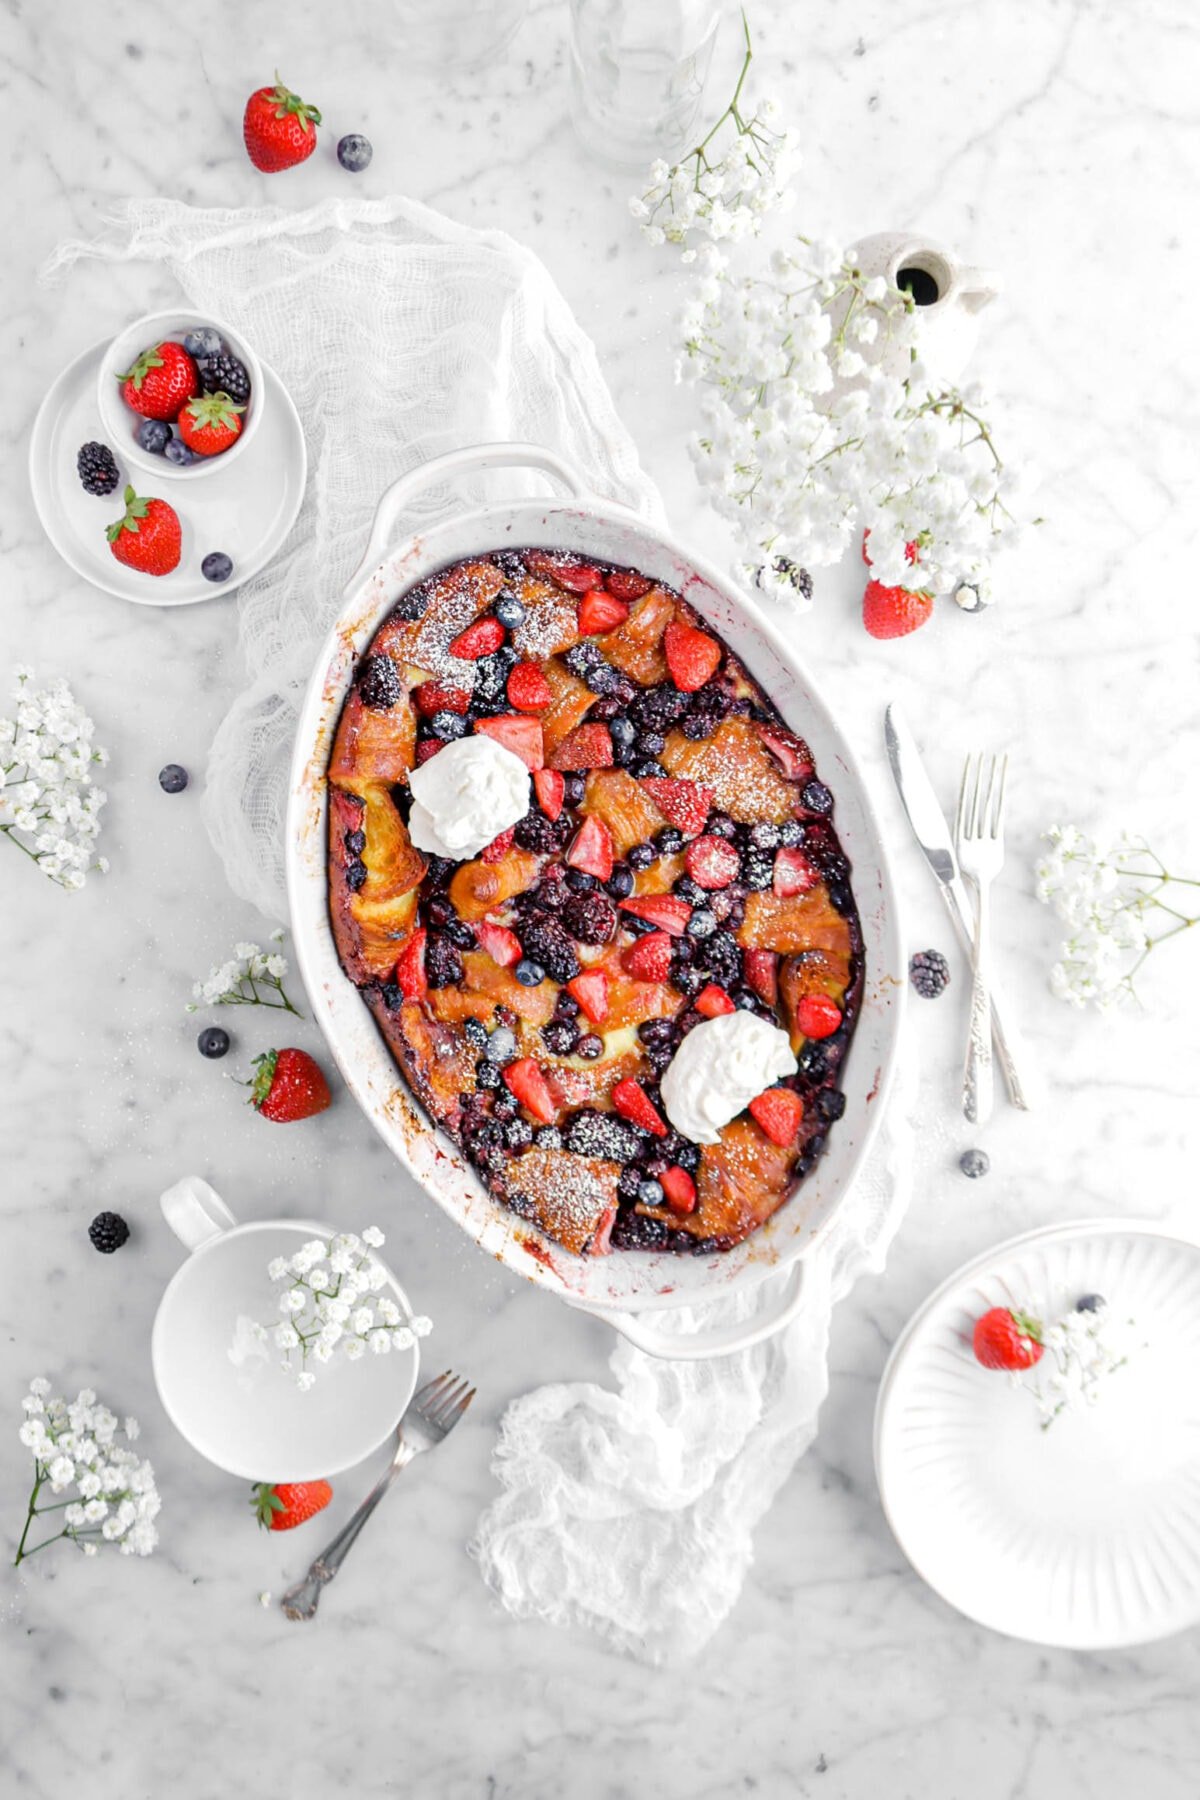 pulled back shot of berry bake in white casserole with flowers, fresh berries, plates, and forks beside